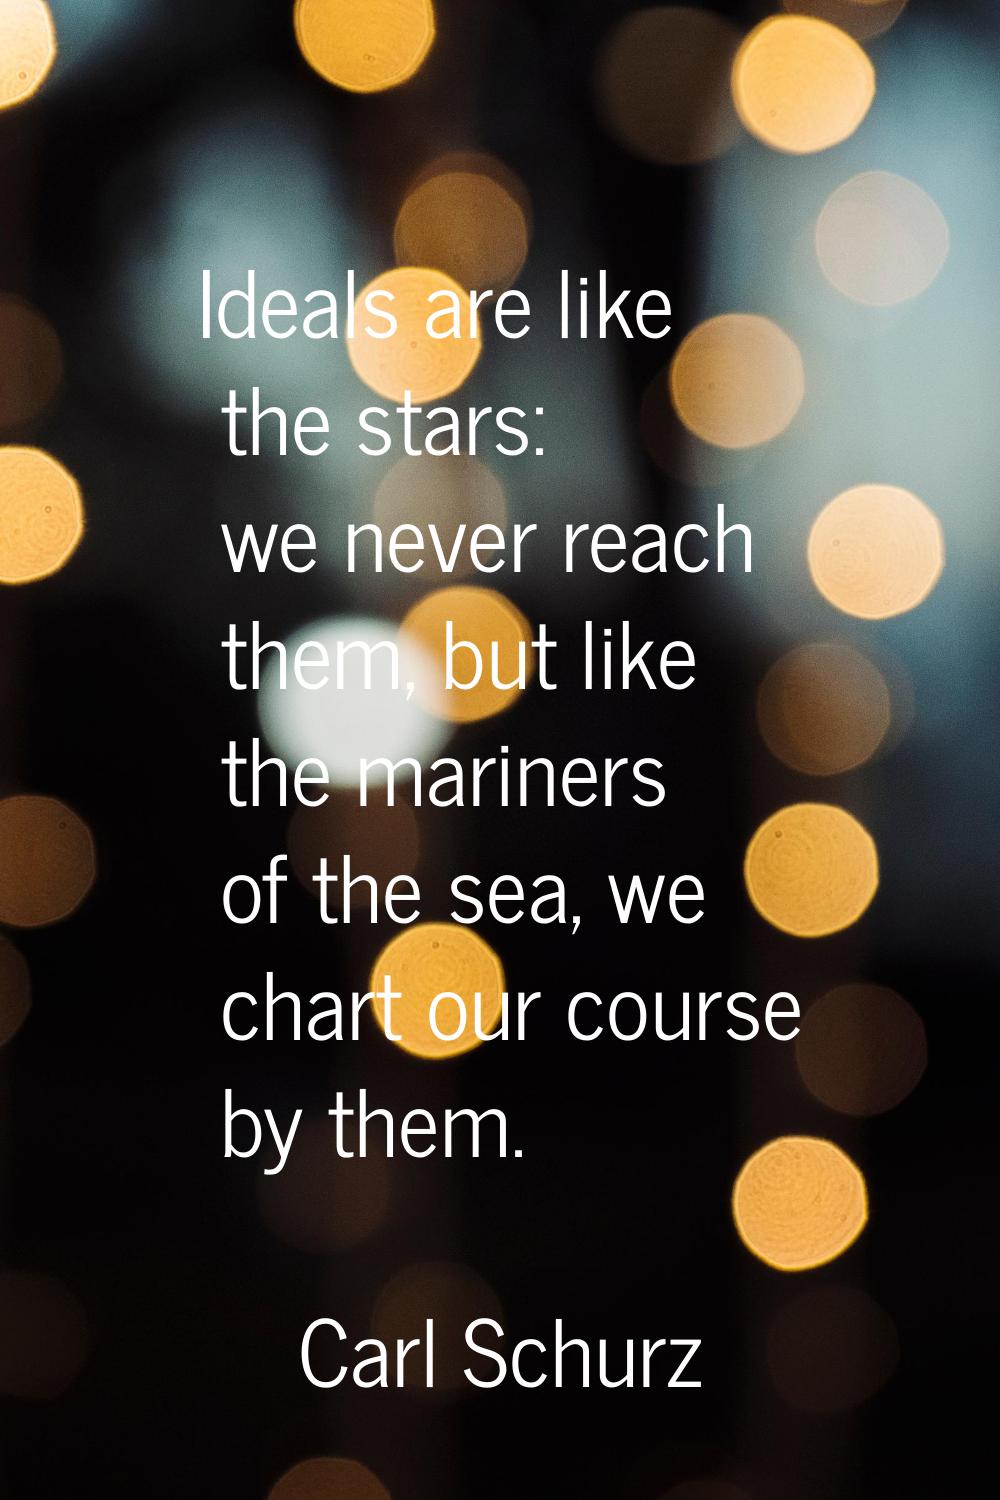 Ideals are like the stars: we never reach them, but like the mariners of the sea, we chart our cour